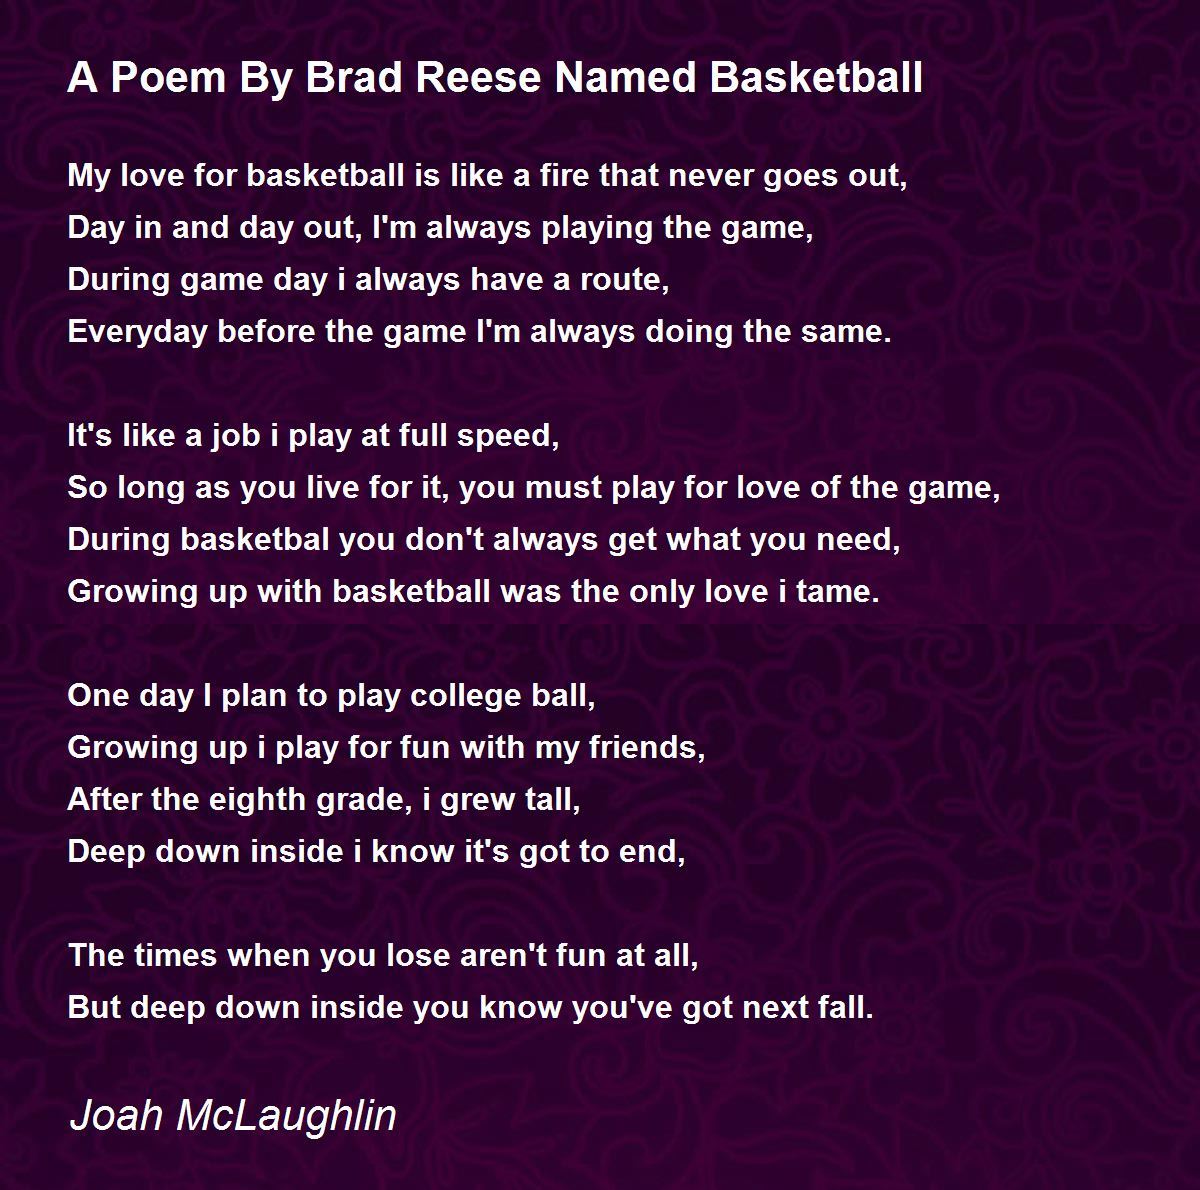 A Poem By Brad Reese Named Basketball A Poem By Brad Reese Named Basketball Poem By Joah Mclaughlin